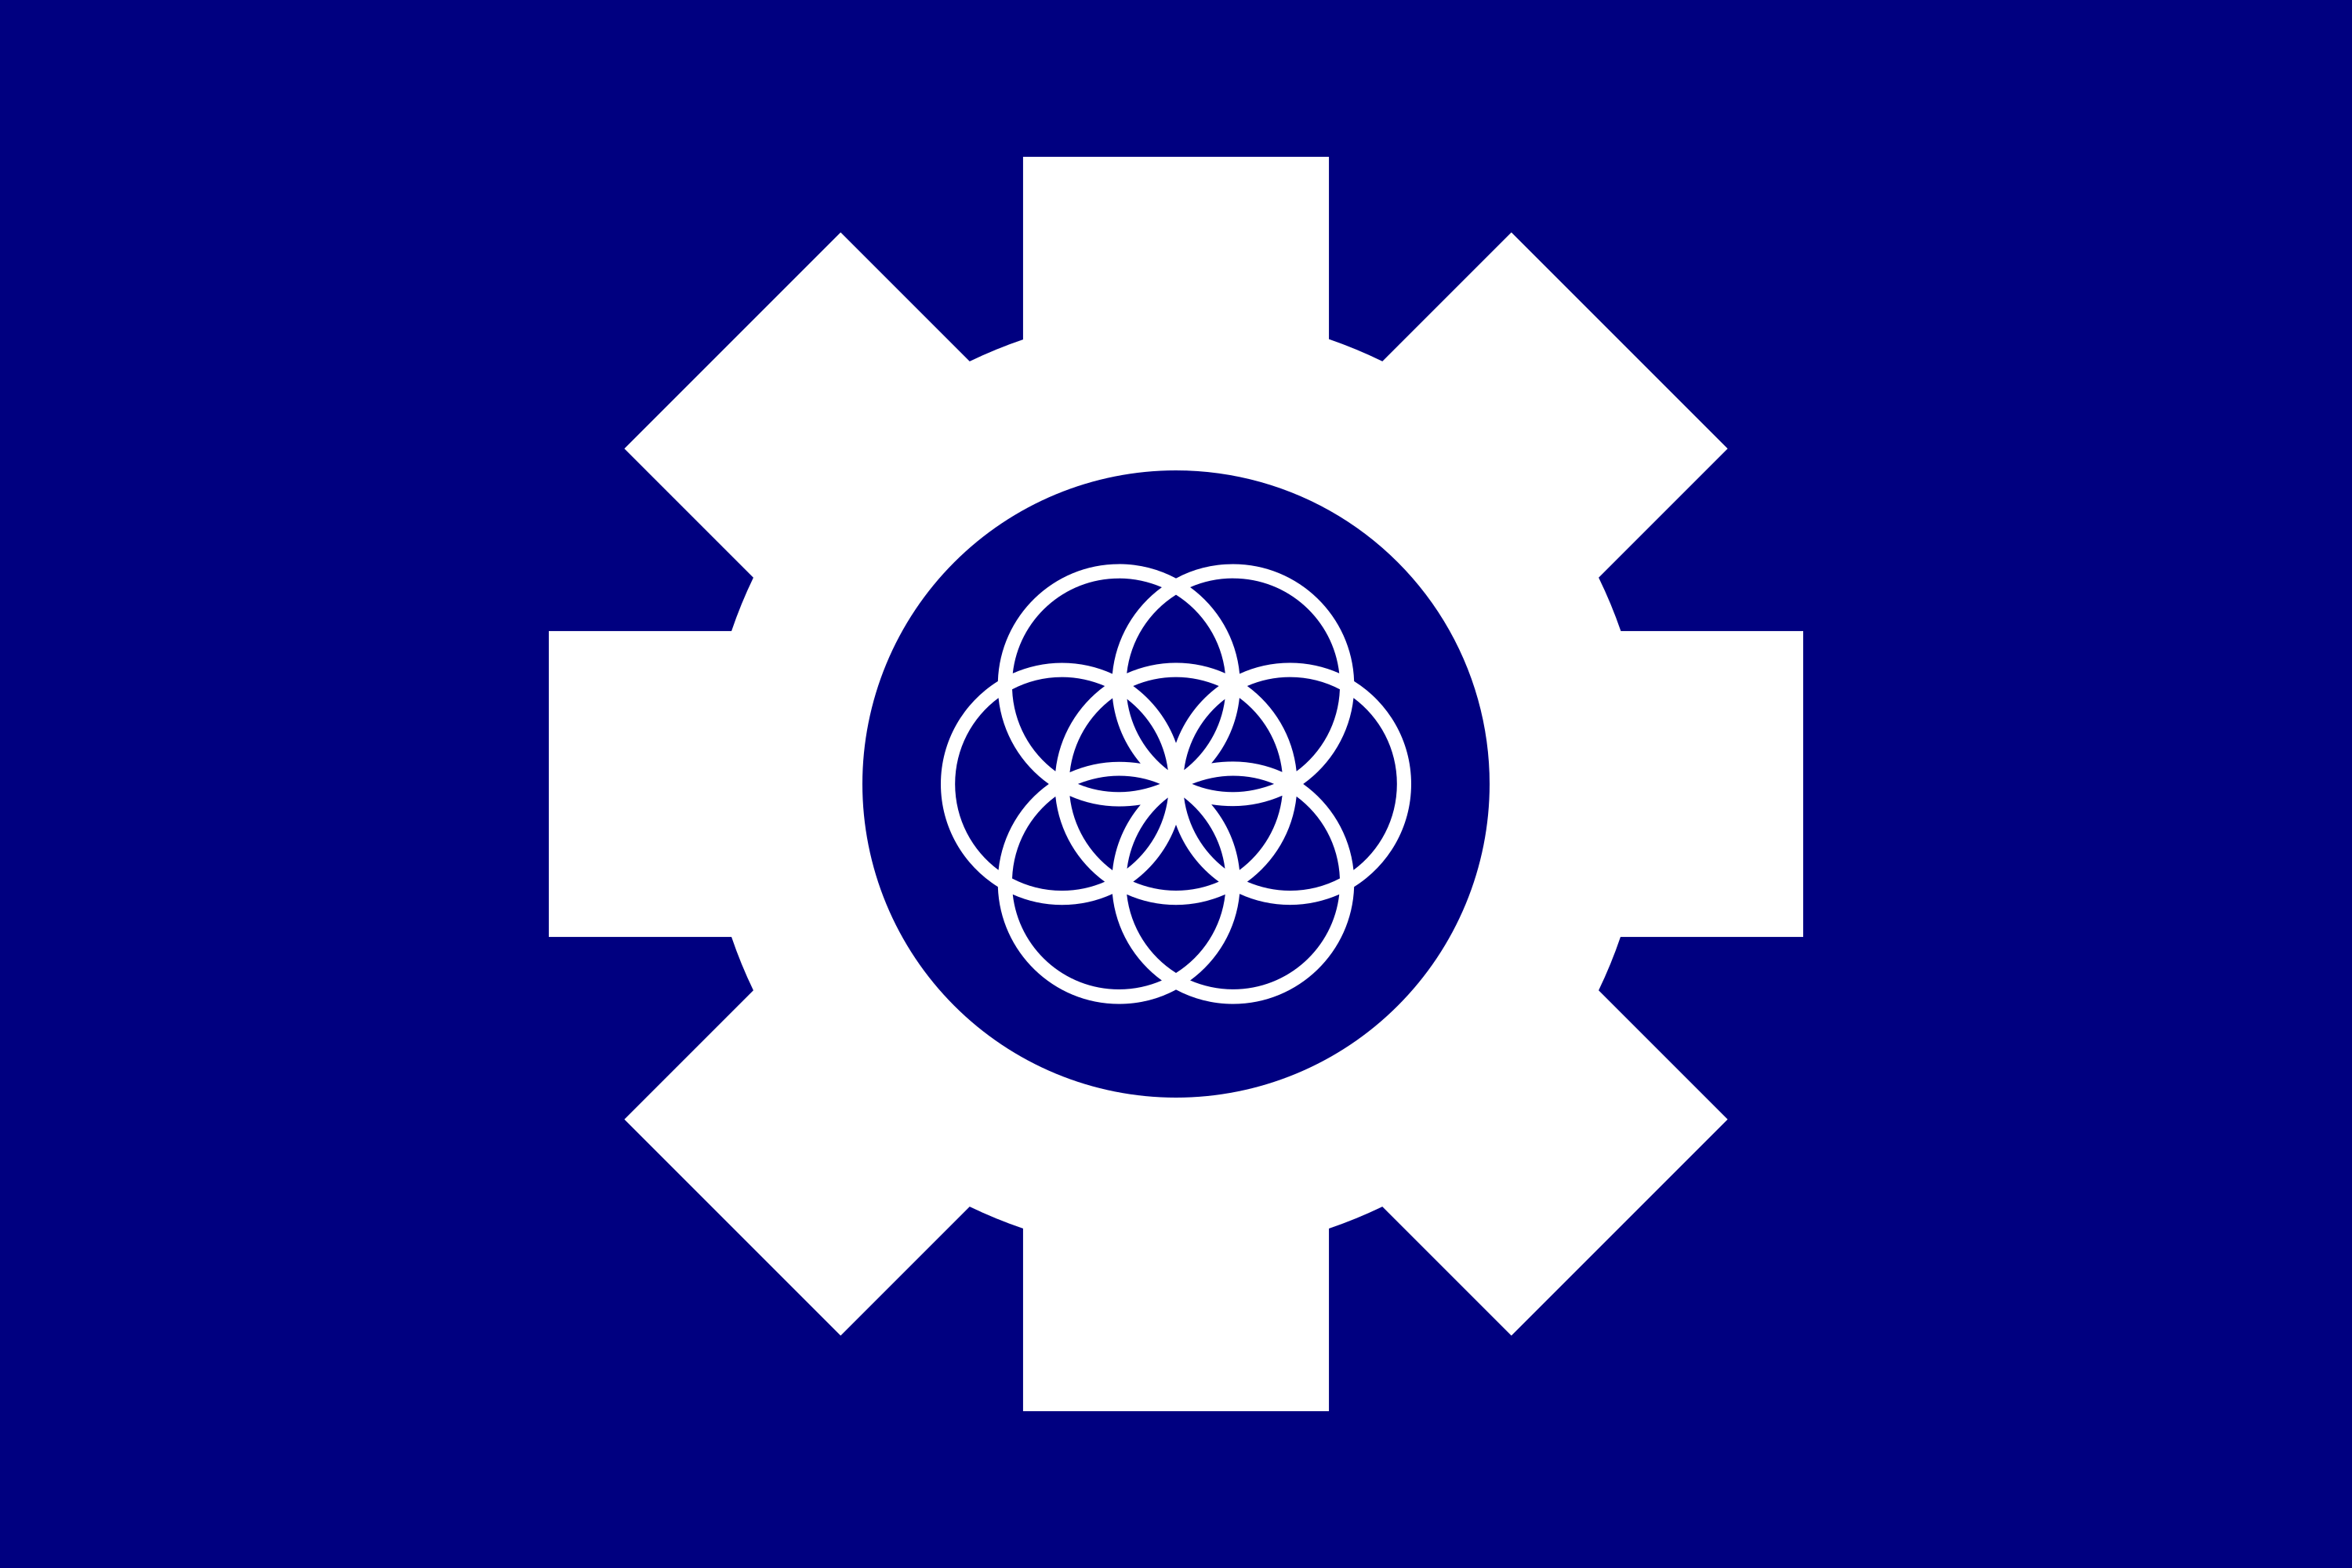 Flag for Technocratic Party (FNE) by MichaelBarboto on DeviantArt